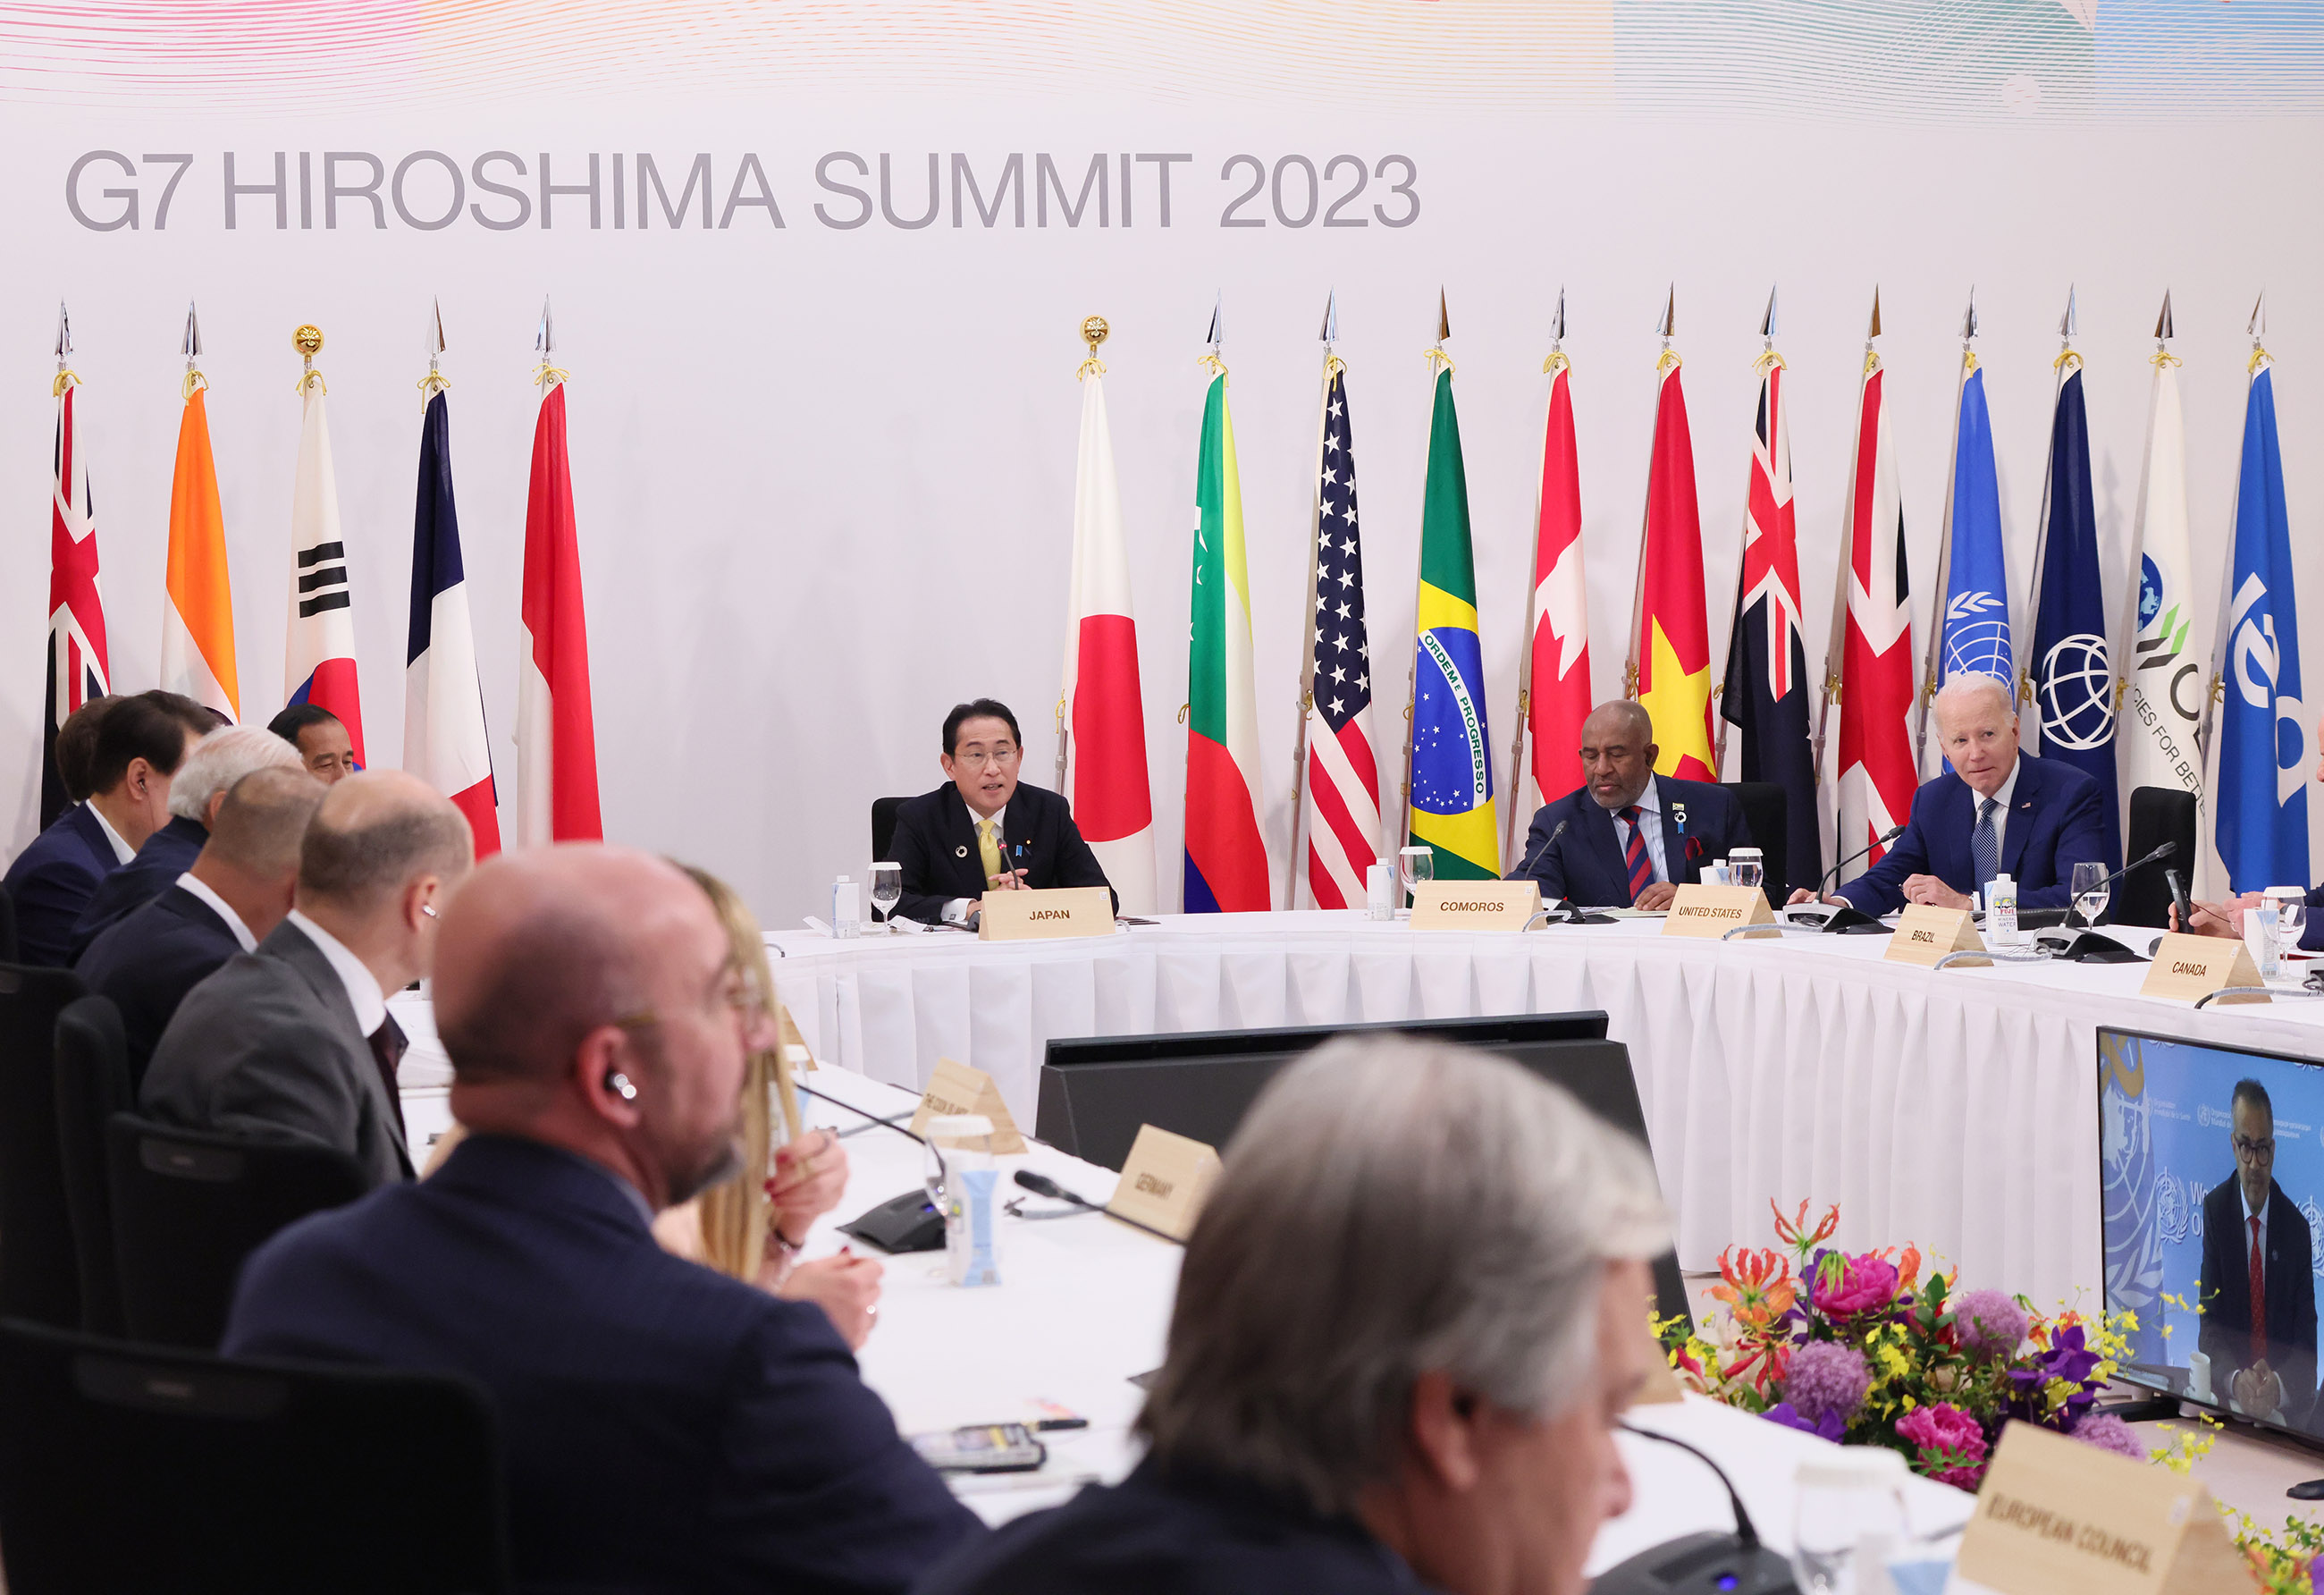 Prime Minister Kishida engaging in discussions at Session 6 (2)